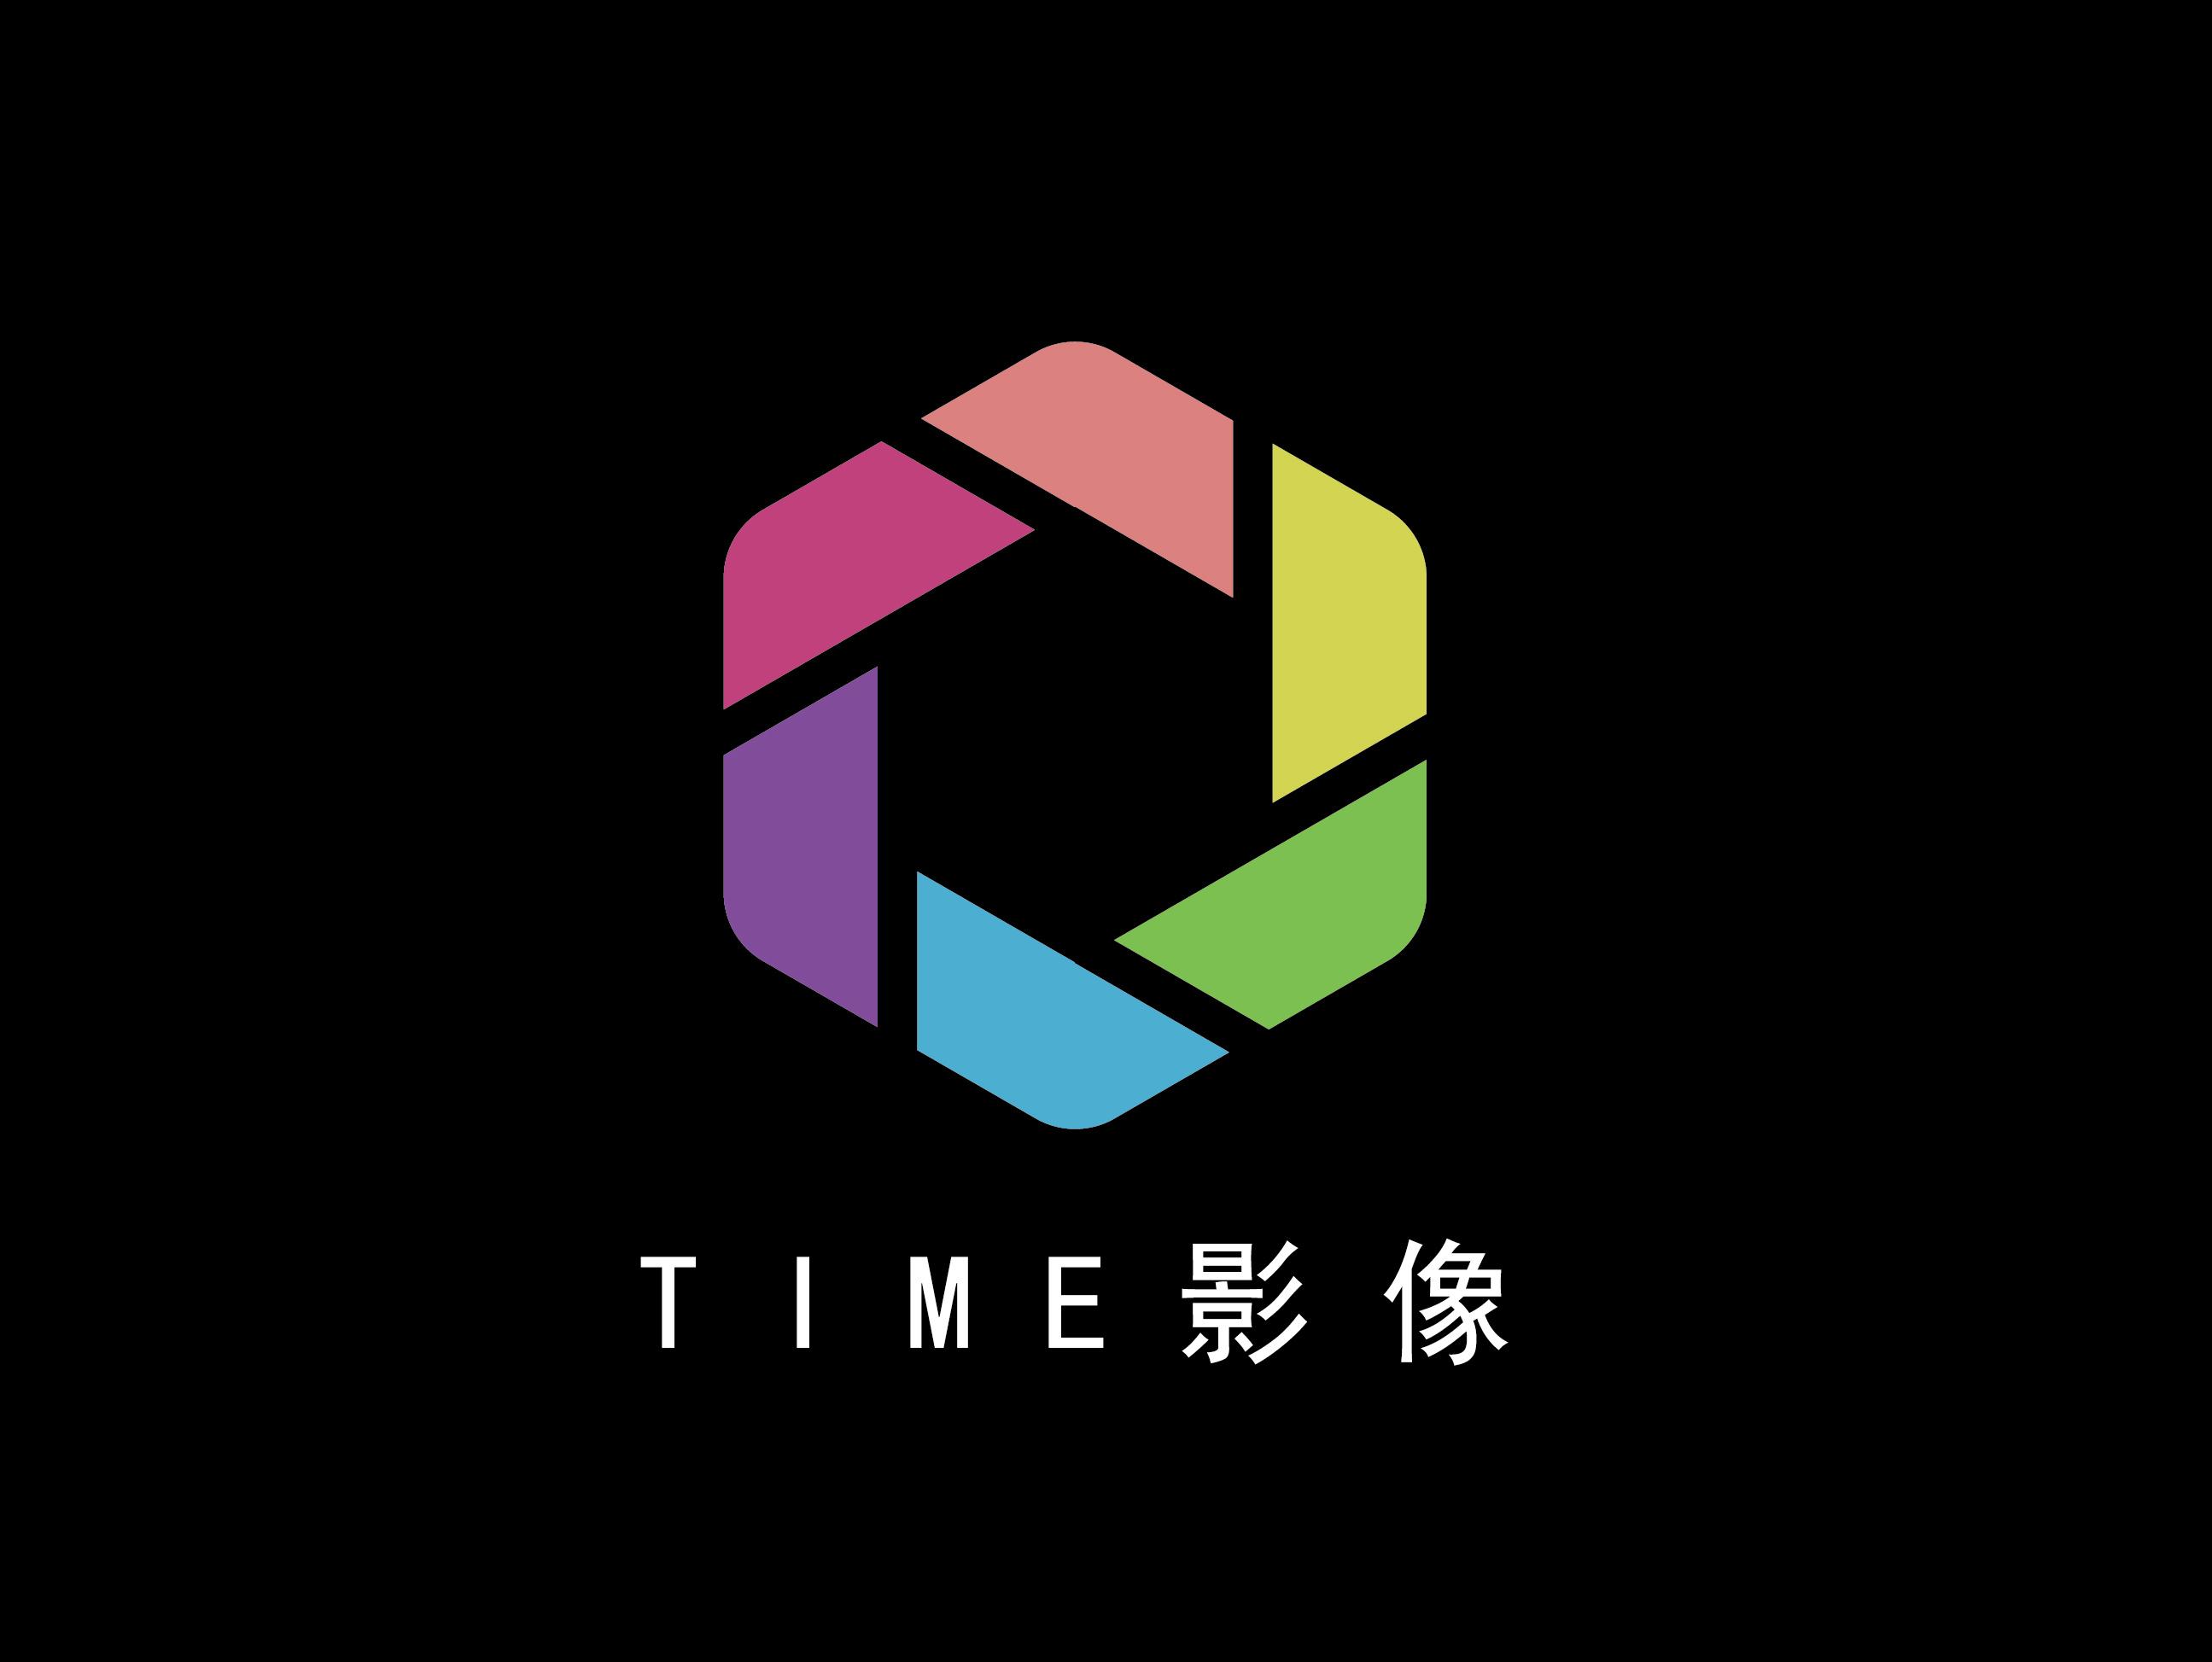 TIME影像